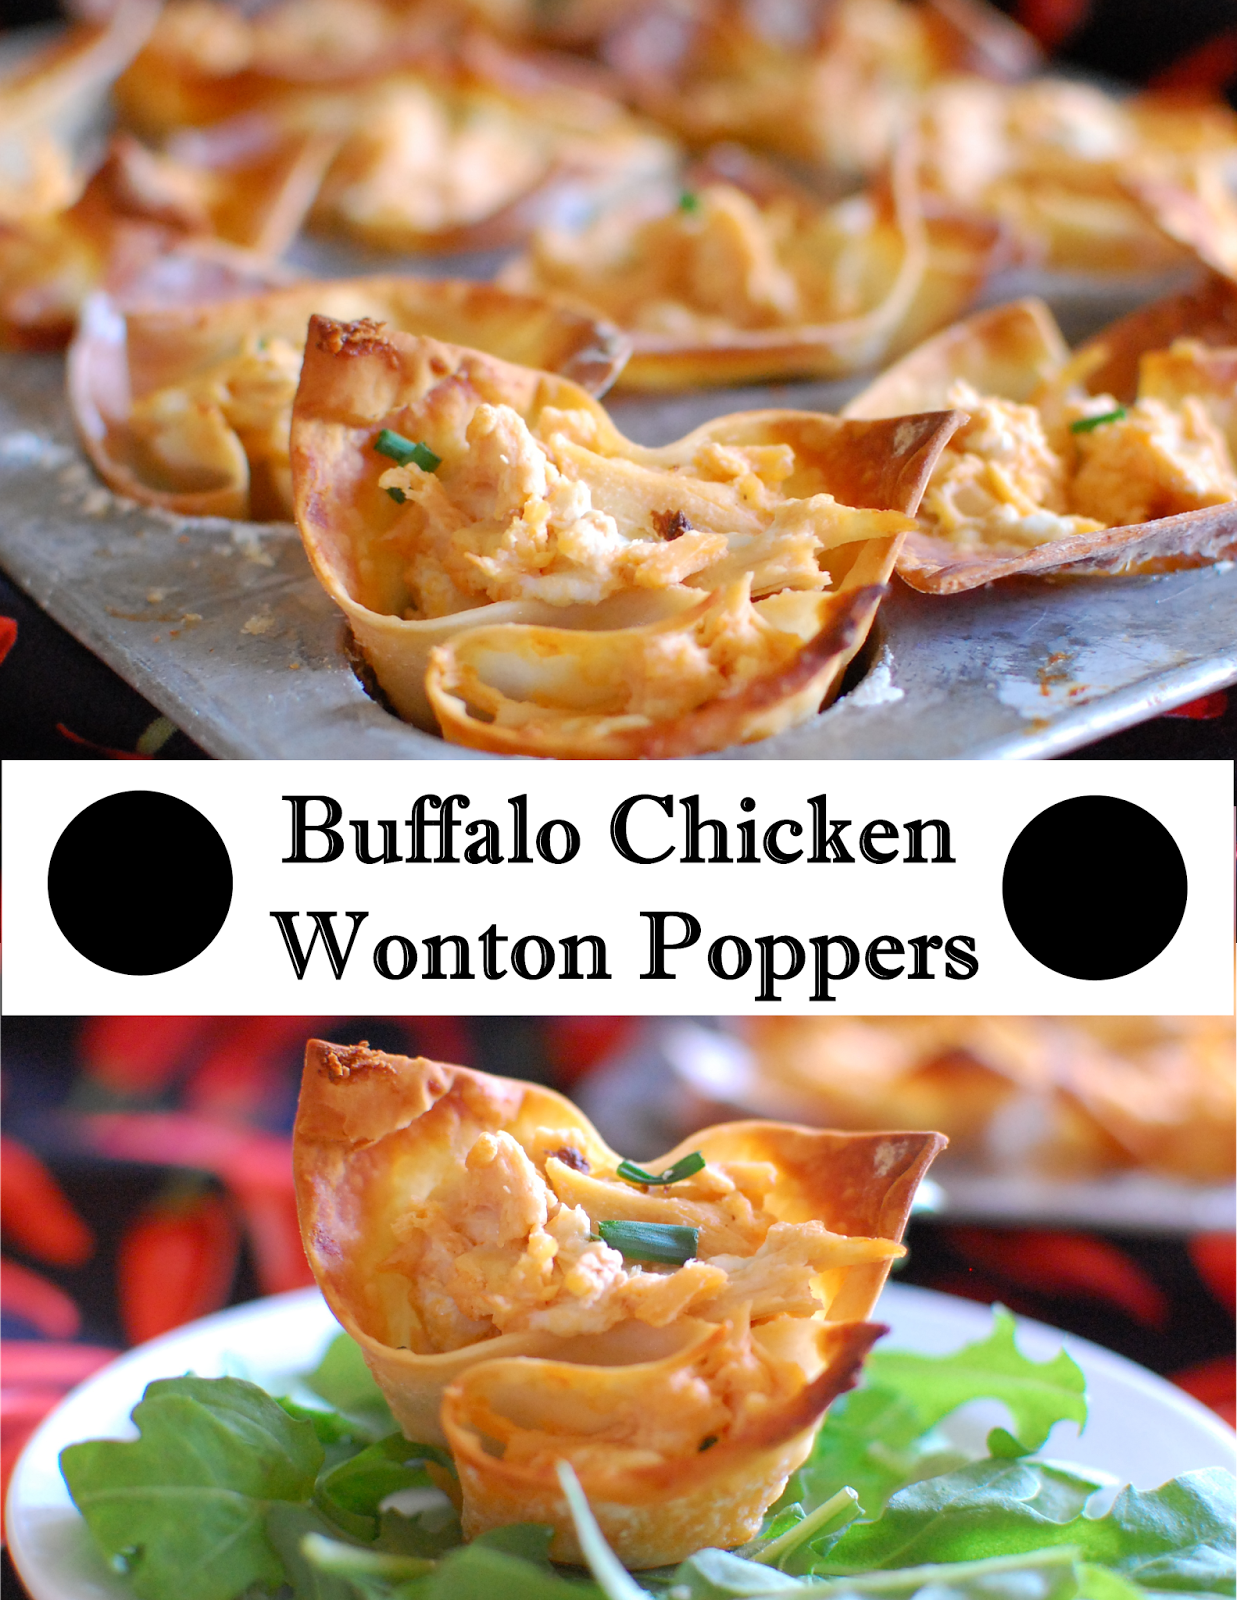 A Sprinkle of This and That: Buffalo Chicken Wonton Poppers